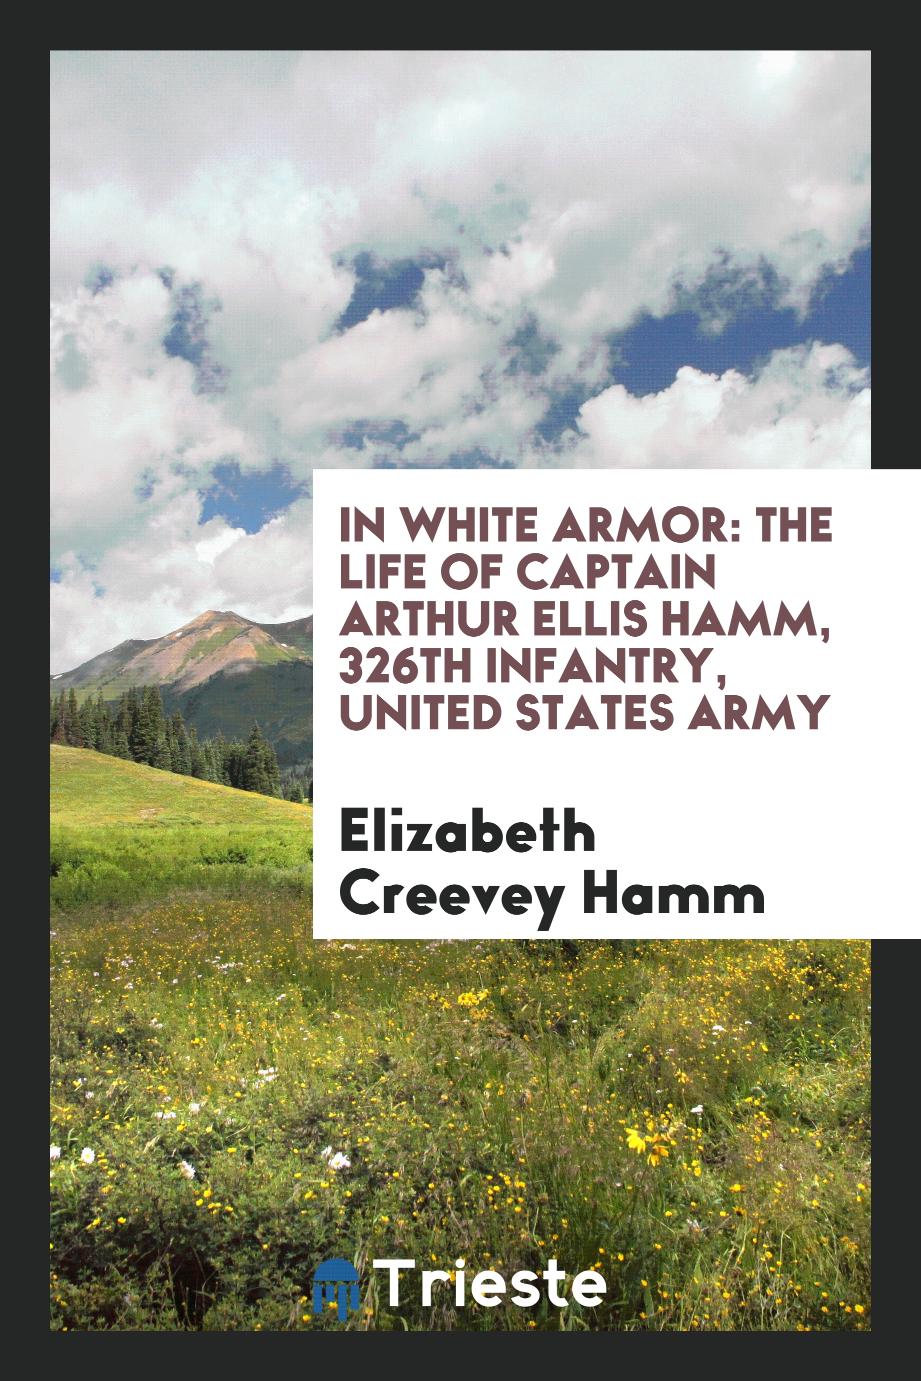 In White Armor: The Life of Captain Arthur Ellis Hamm, 326th Infantry, United States Army